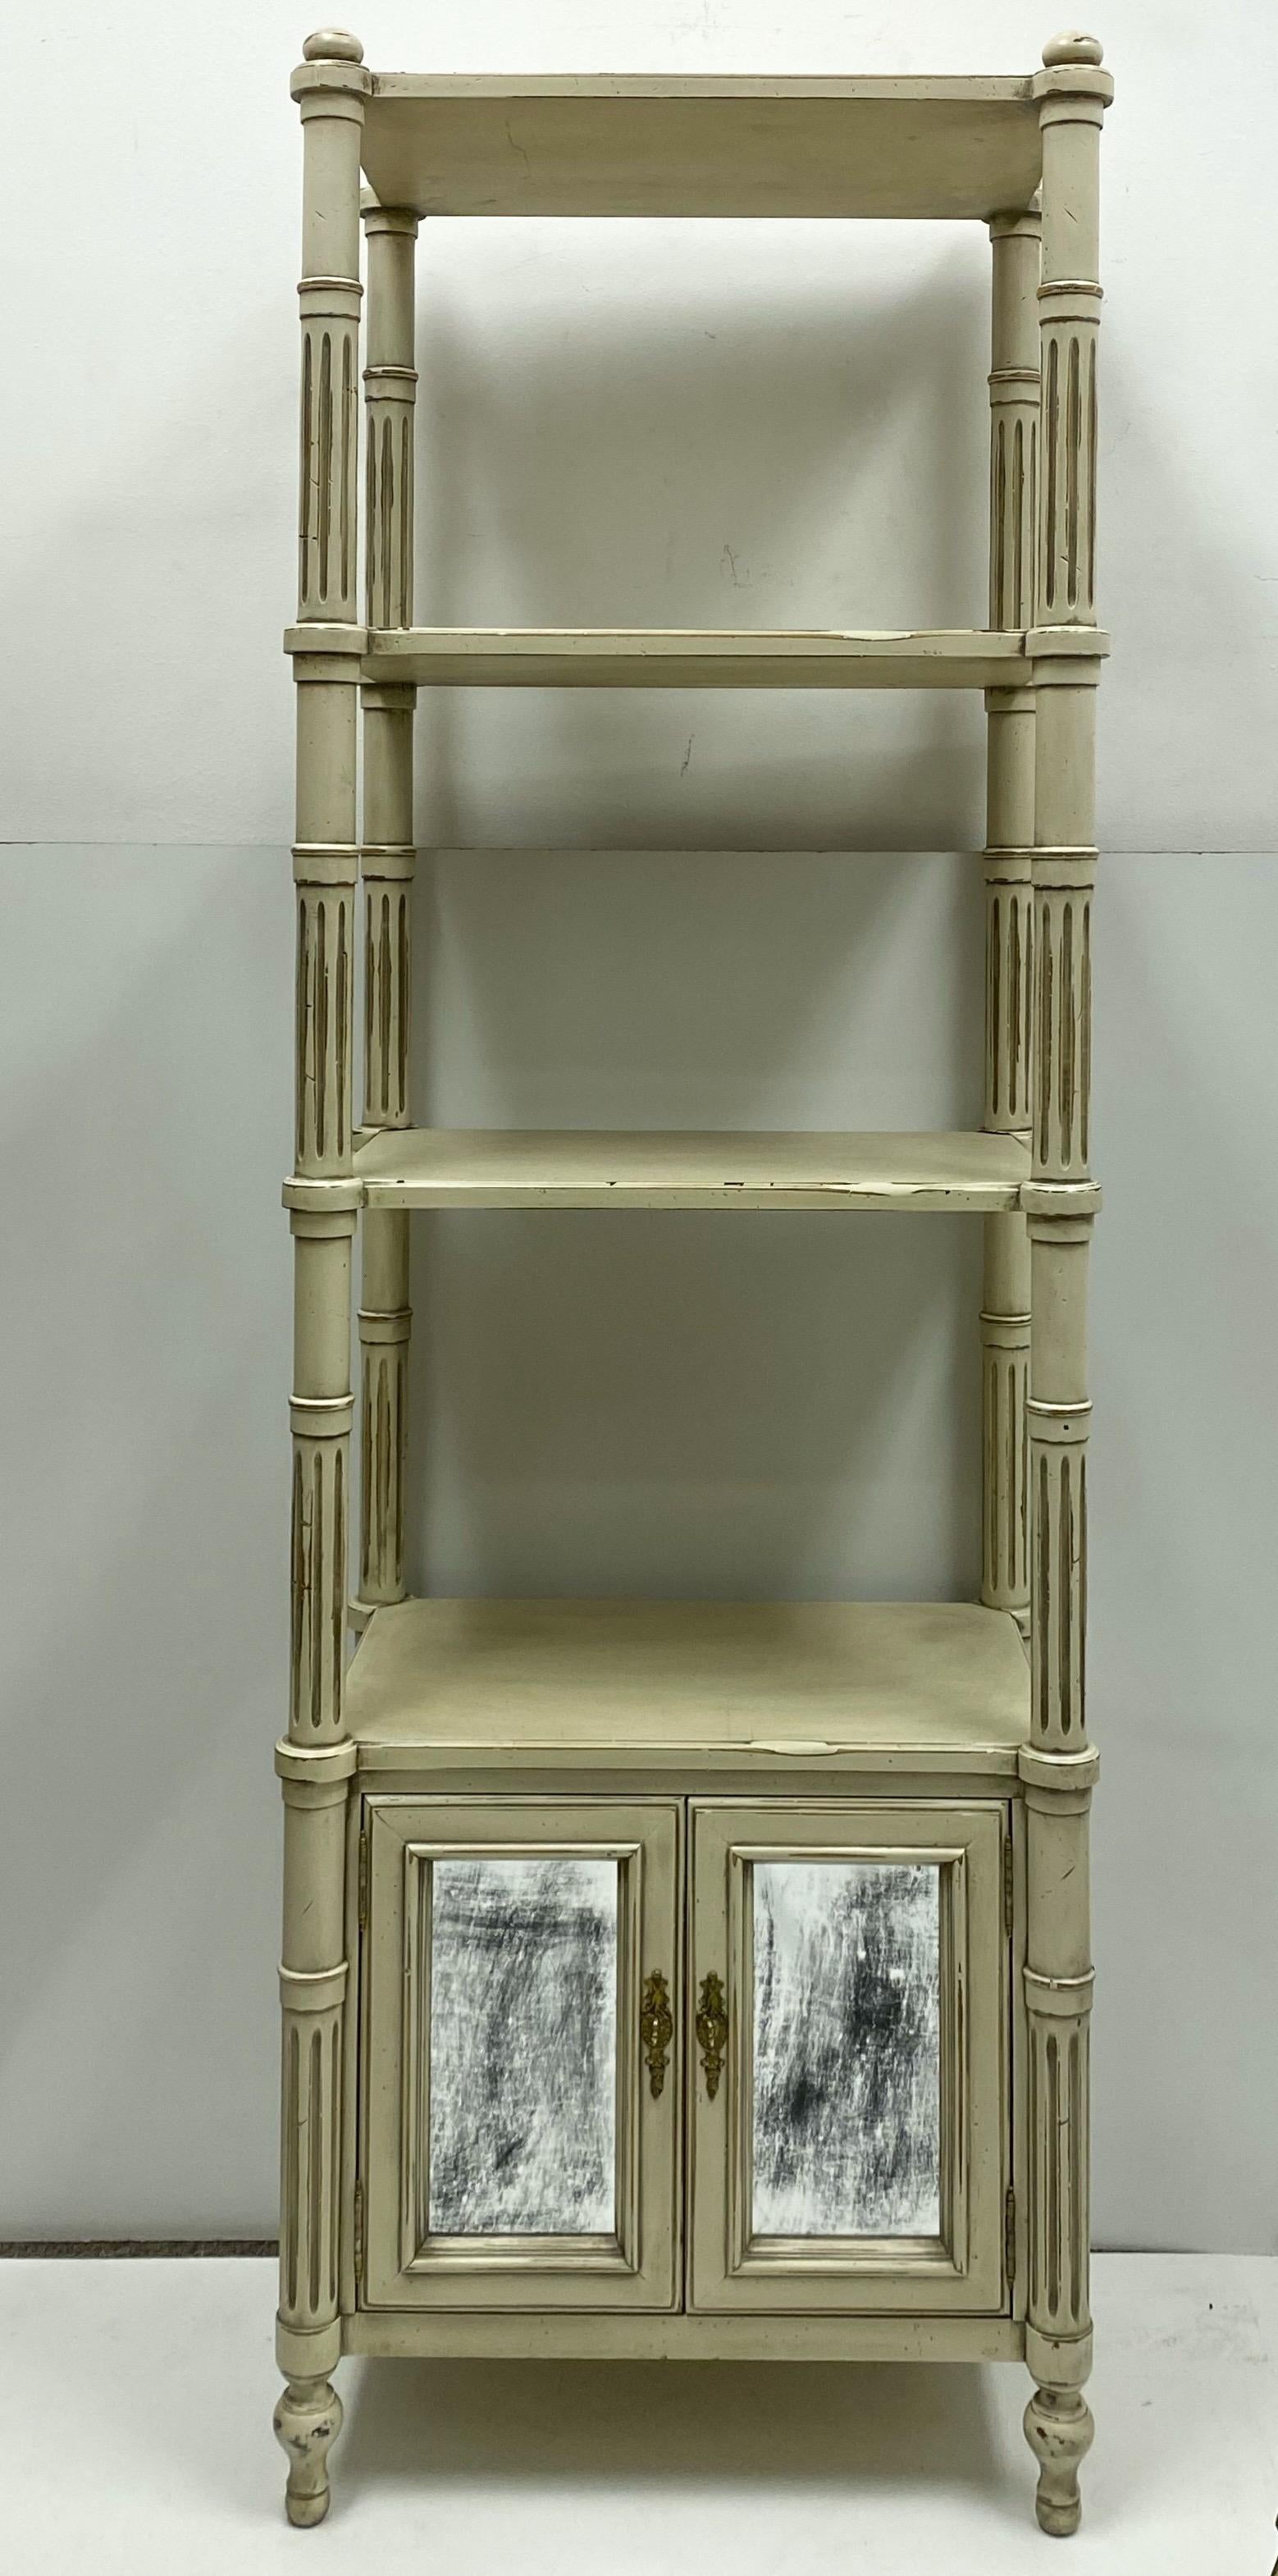 Late 20th-C. Gustavian or Swedish Style Etageres / Bookshelves / Cabinets, Pair In Good Condition For Sale In Kennesaw, GA